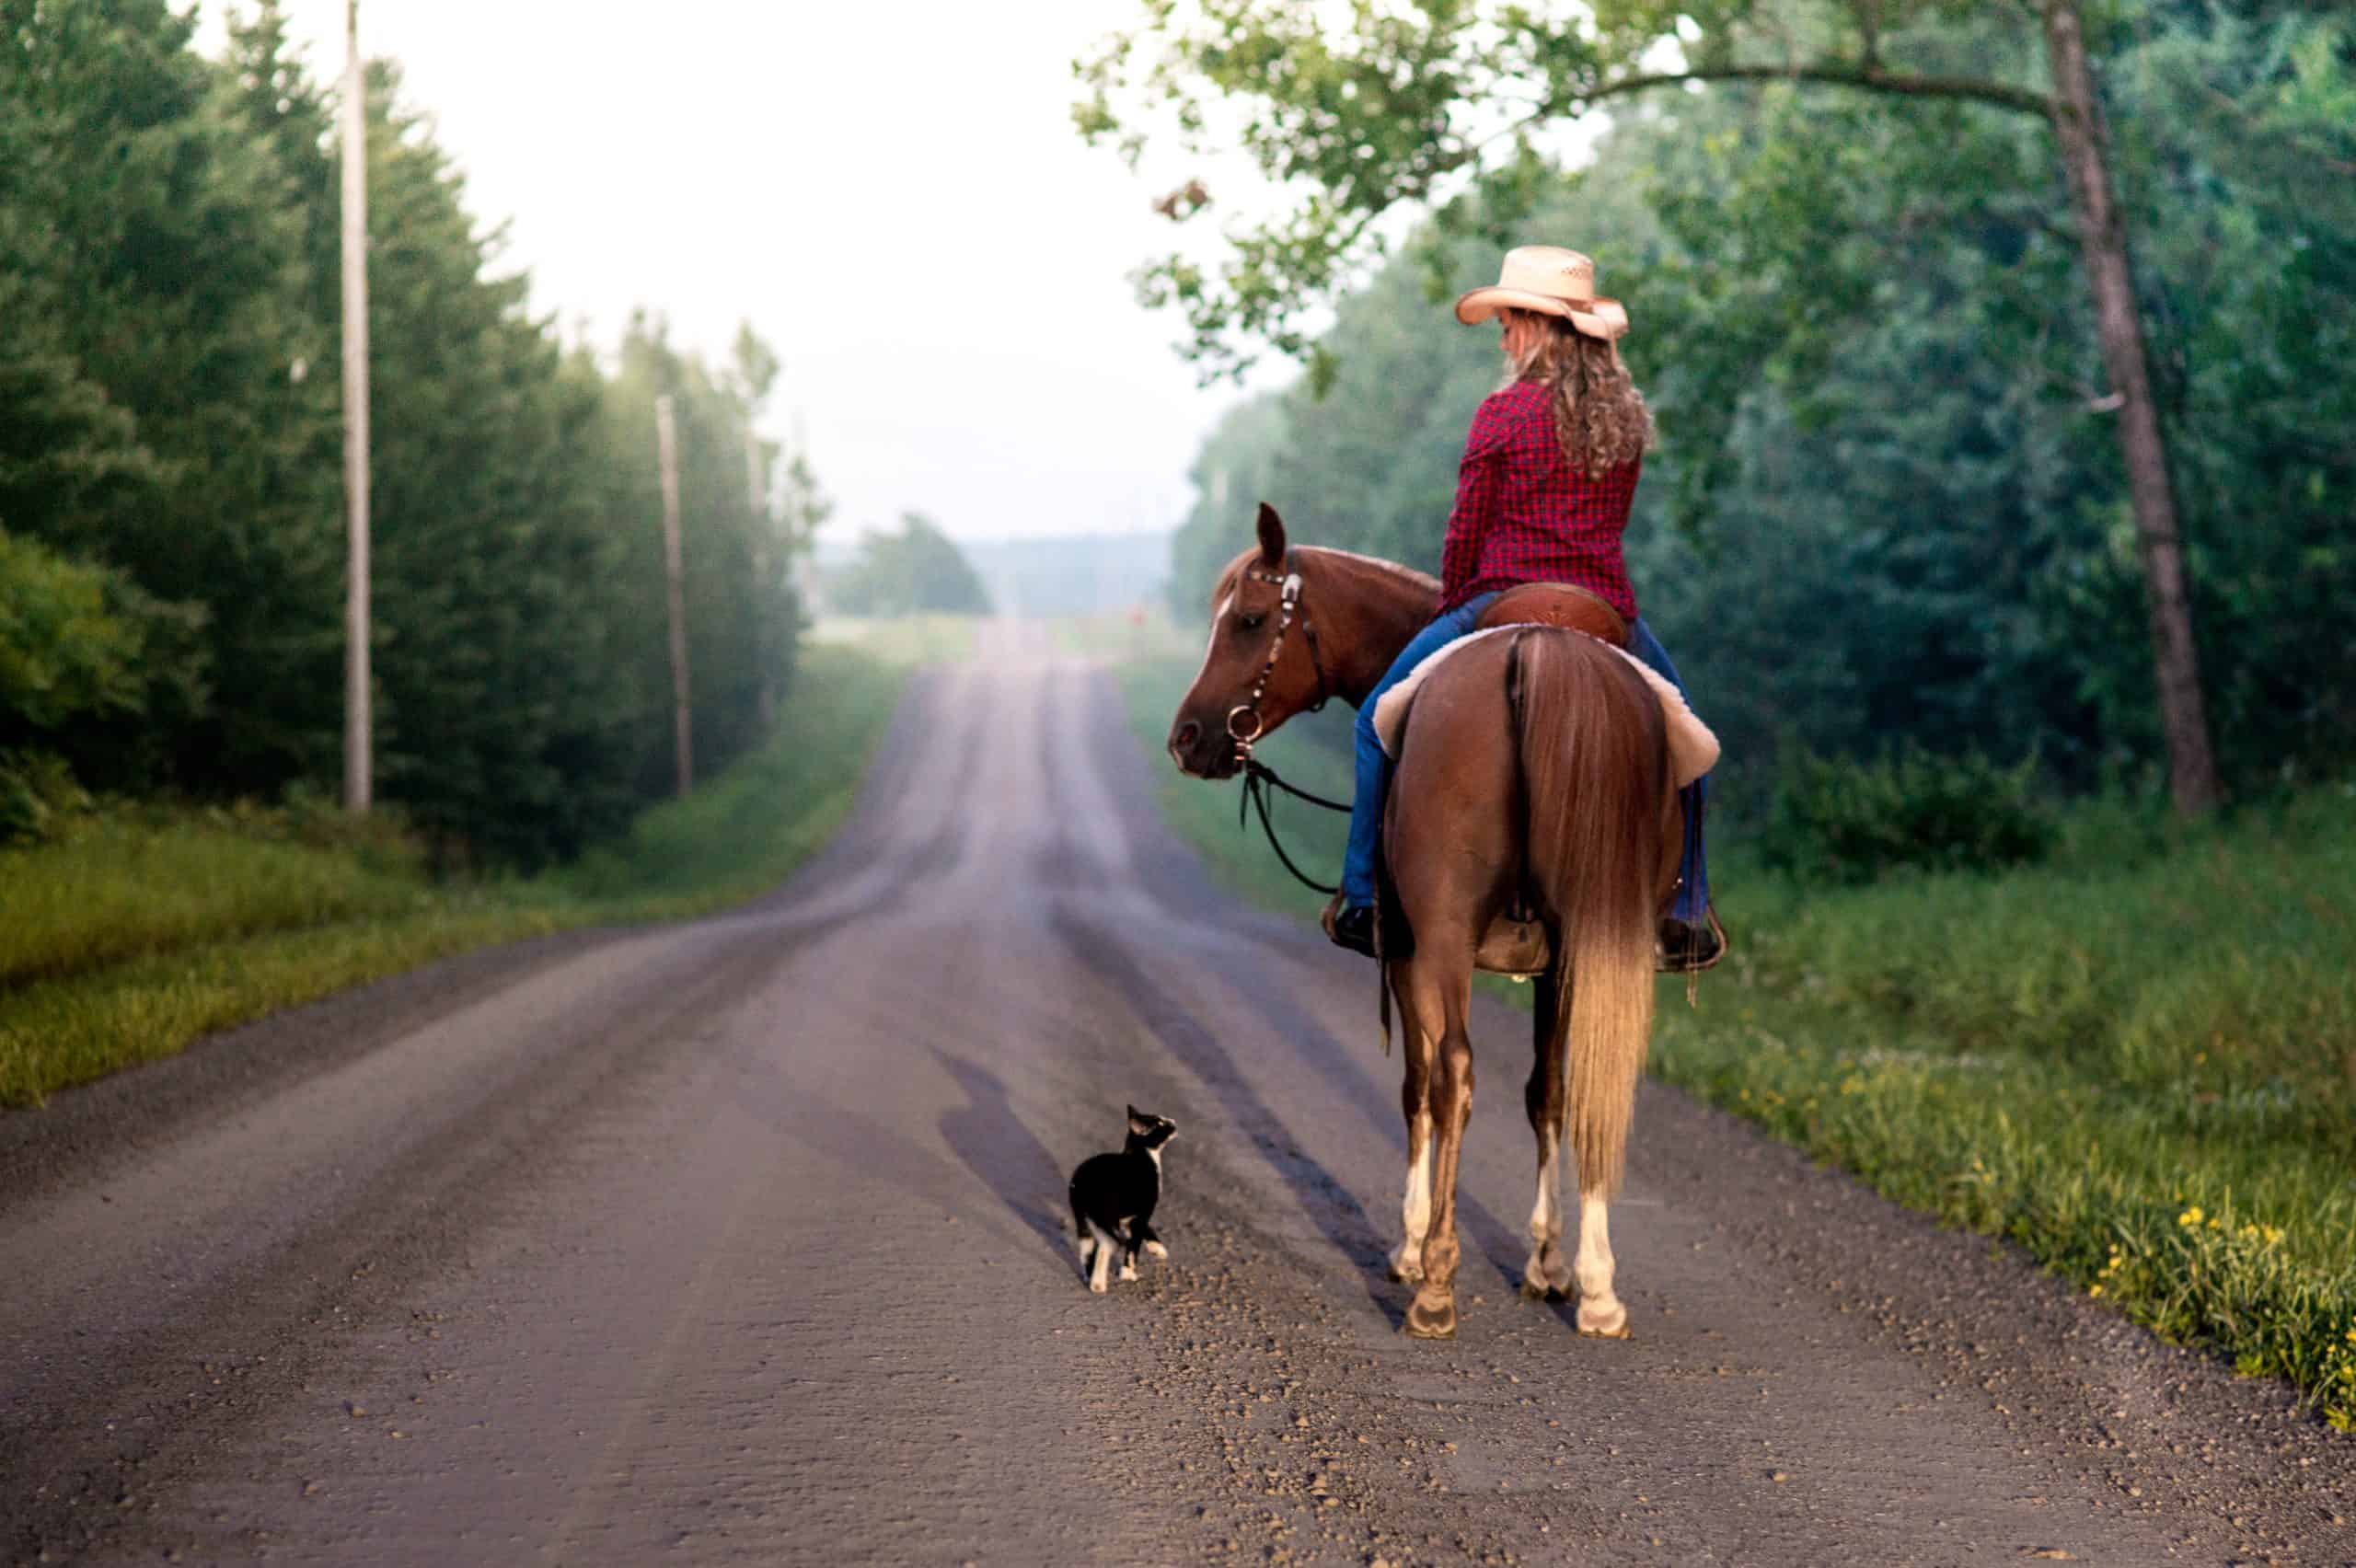 Cat follows Horseback Rider on Country Road in Summer Time